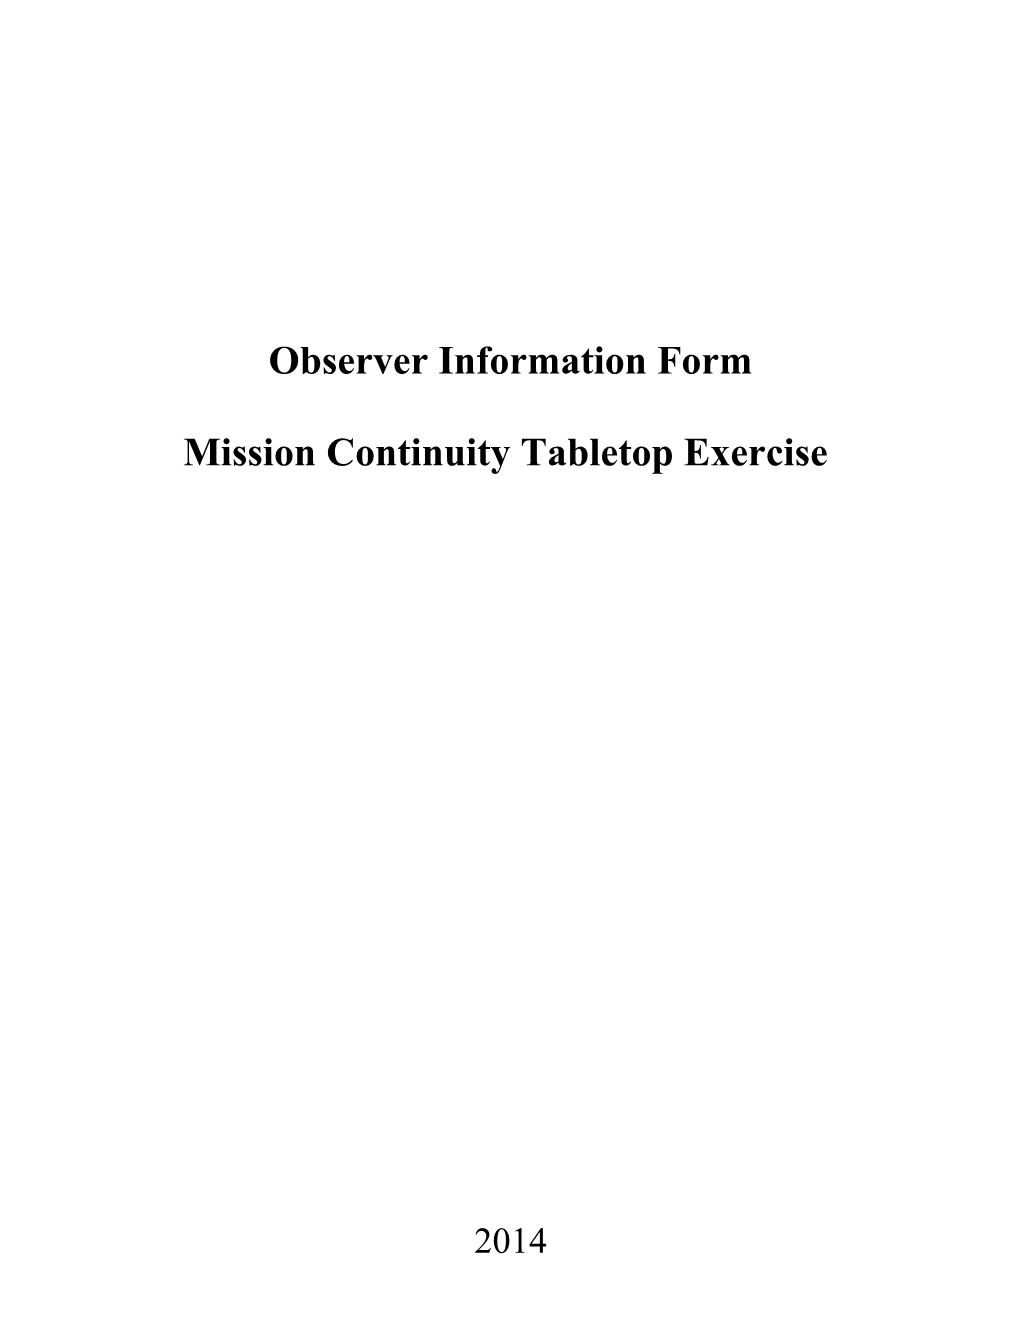 Mission Continuity Tabletop Exercise